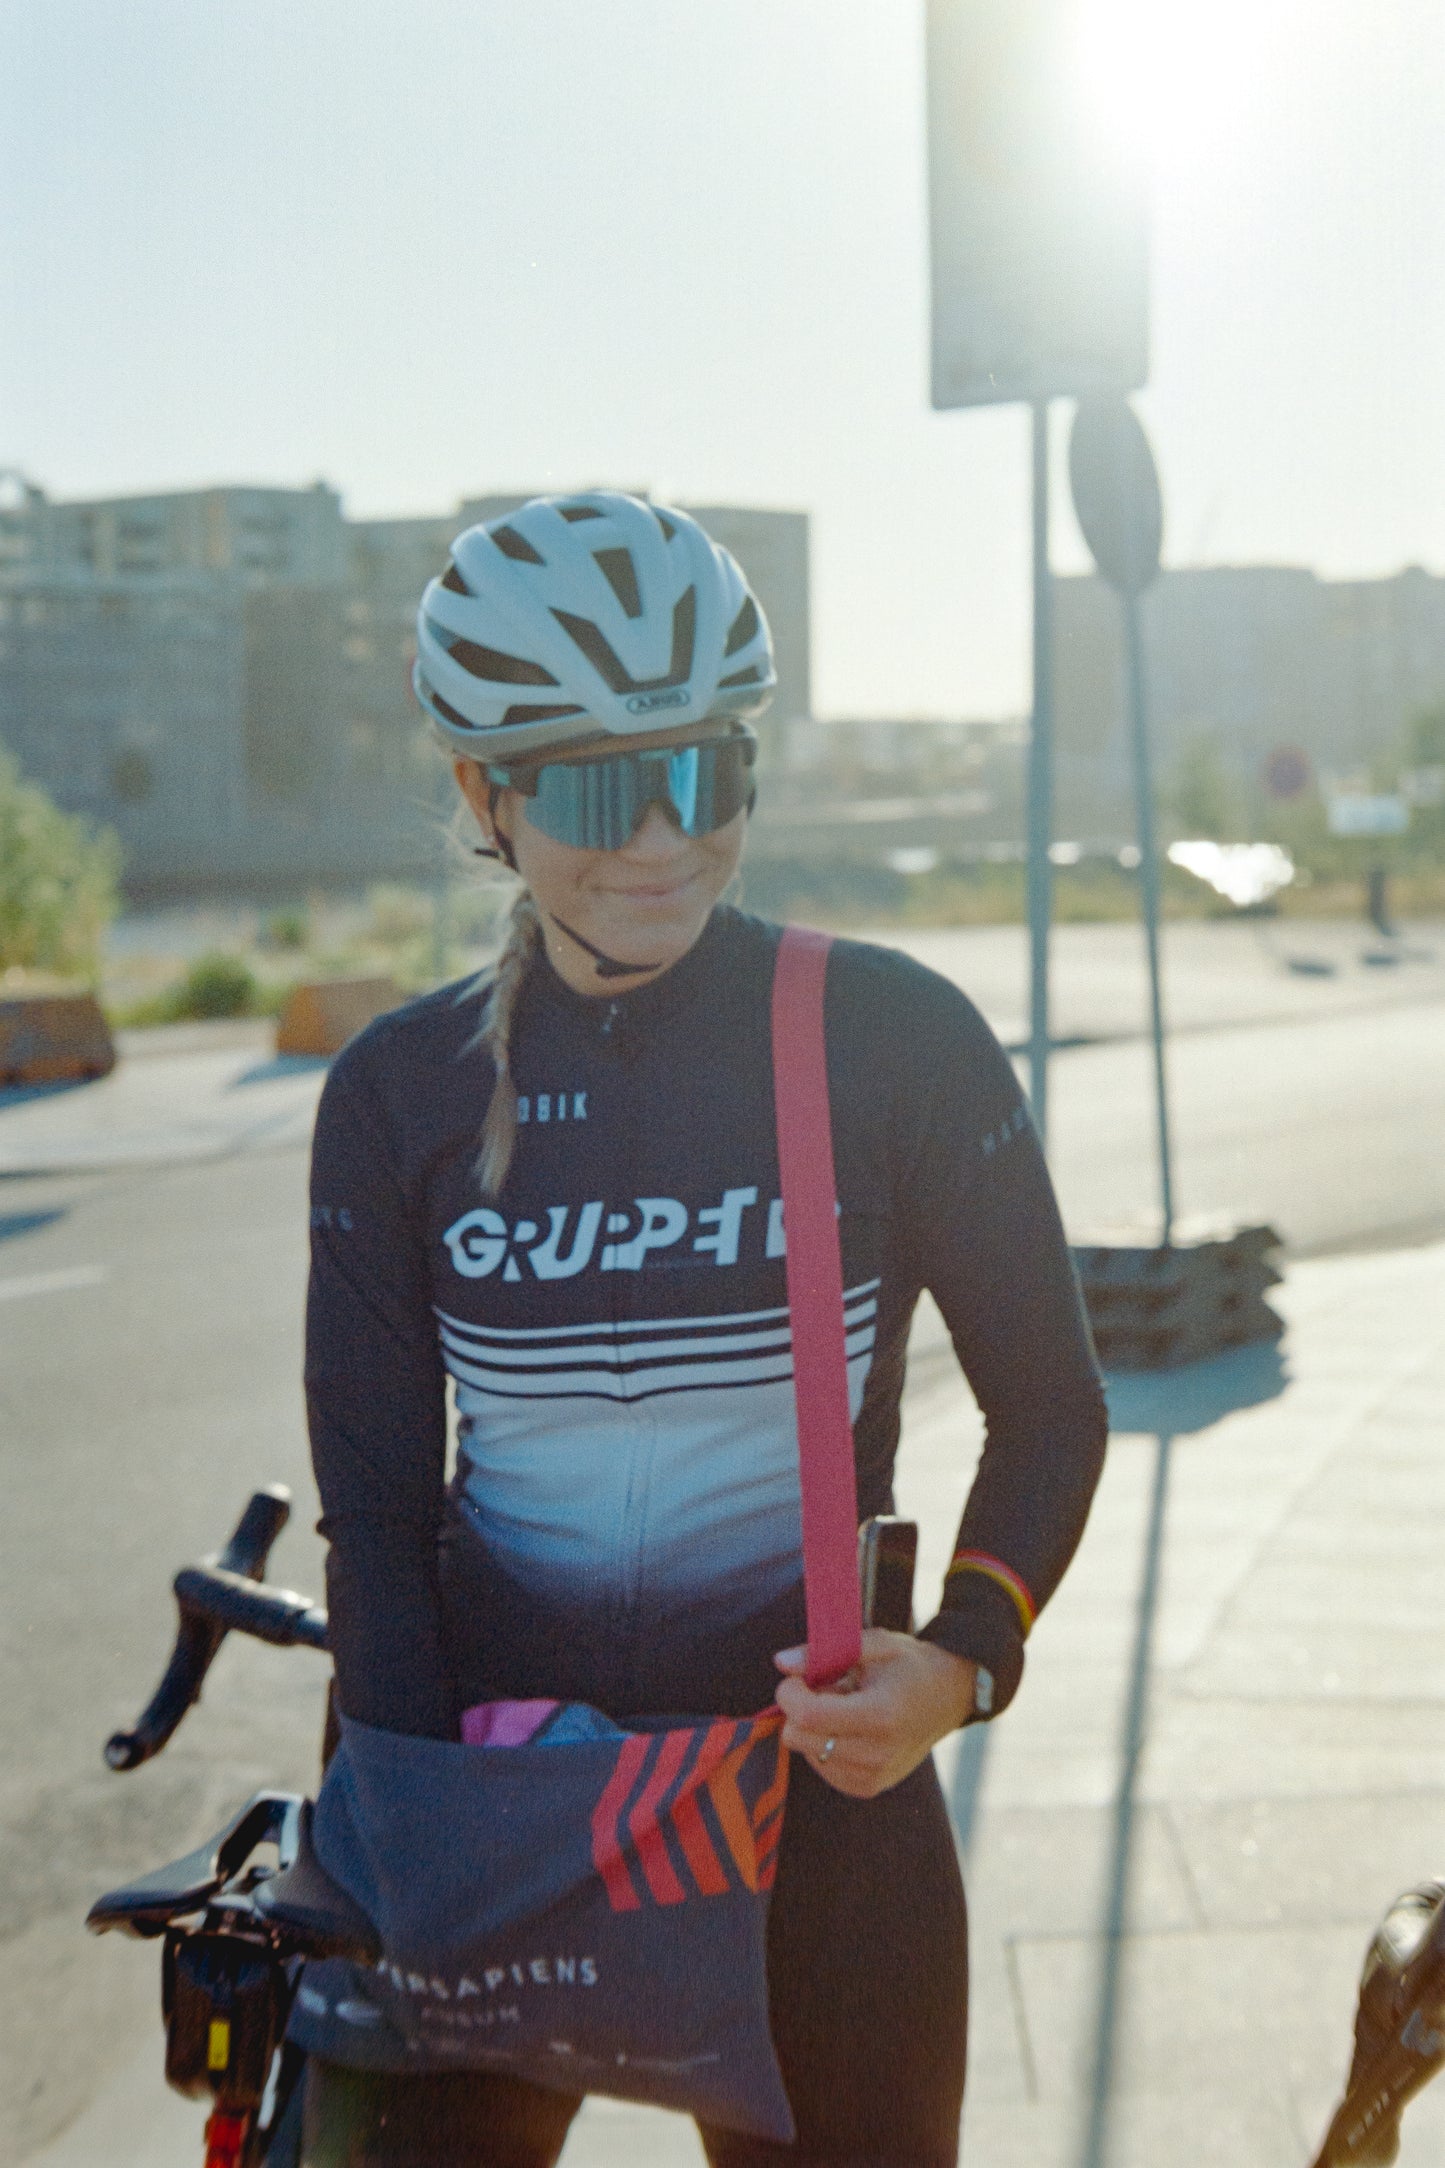 GRUPPETTO LONGSLEEVE JERSEY - for chilly days